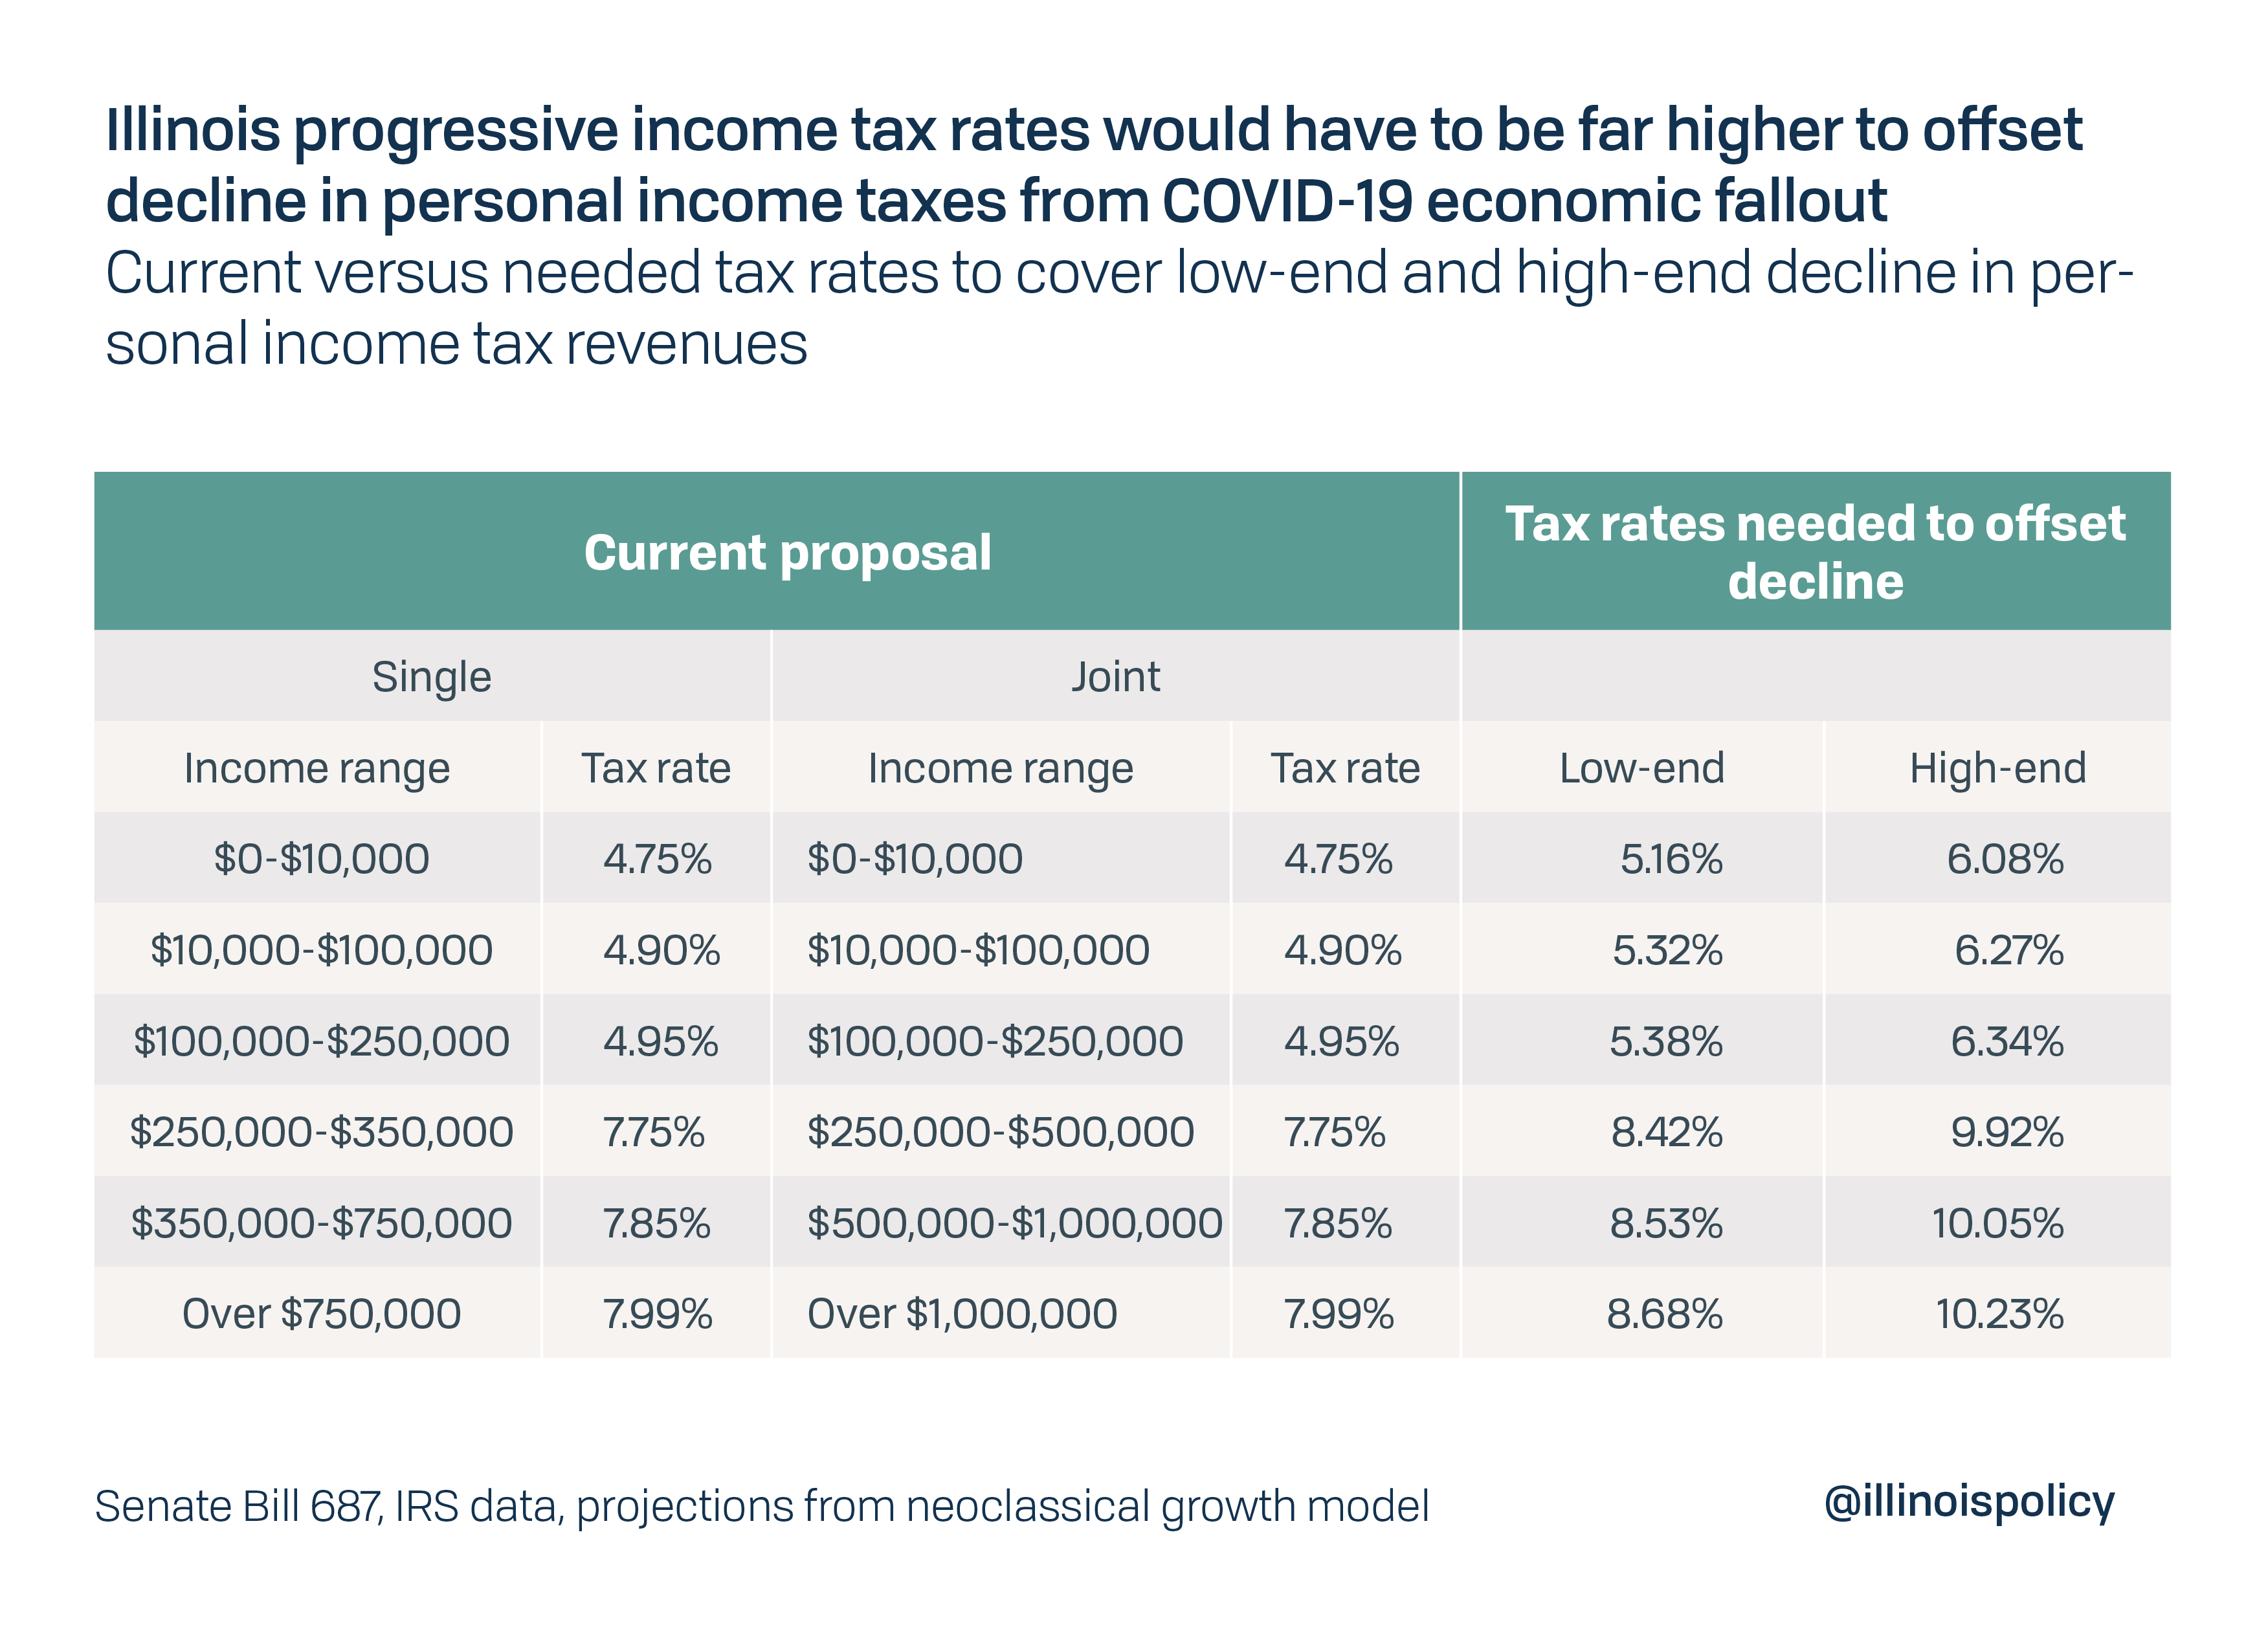 Illinois progressive income tax rates would have to be far higher to offset decline in personal income taxes from COVID-19 economic fallout